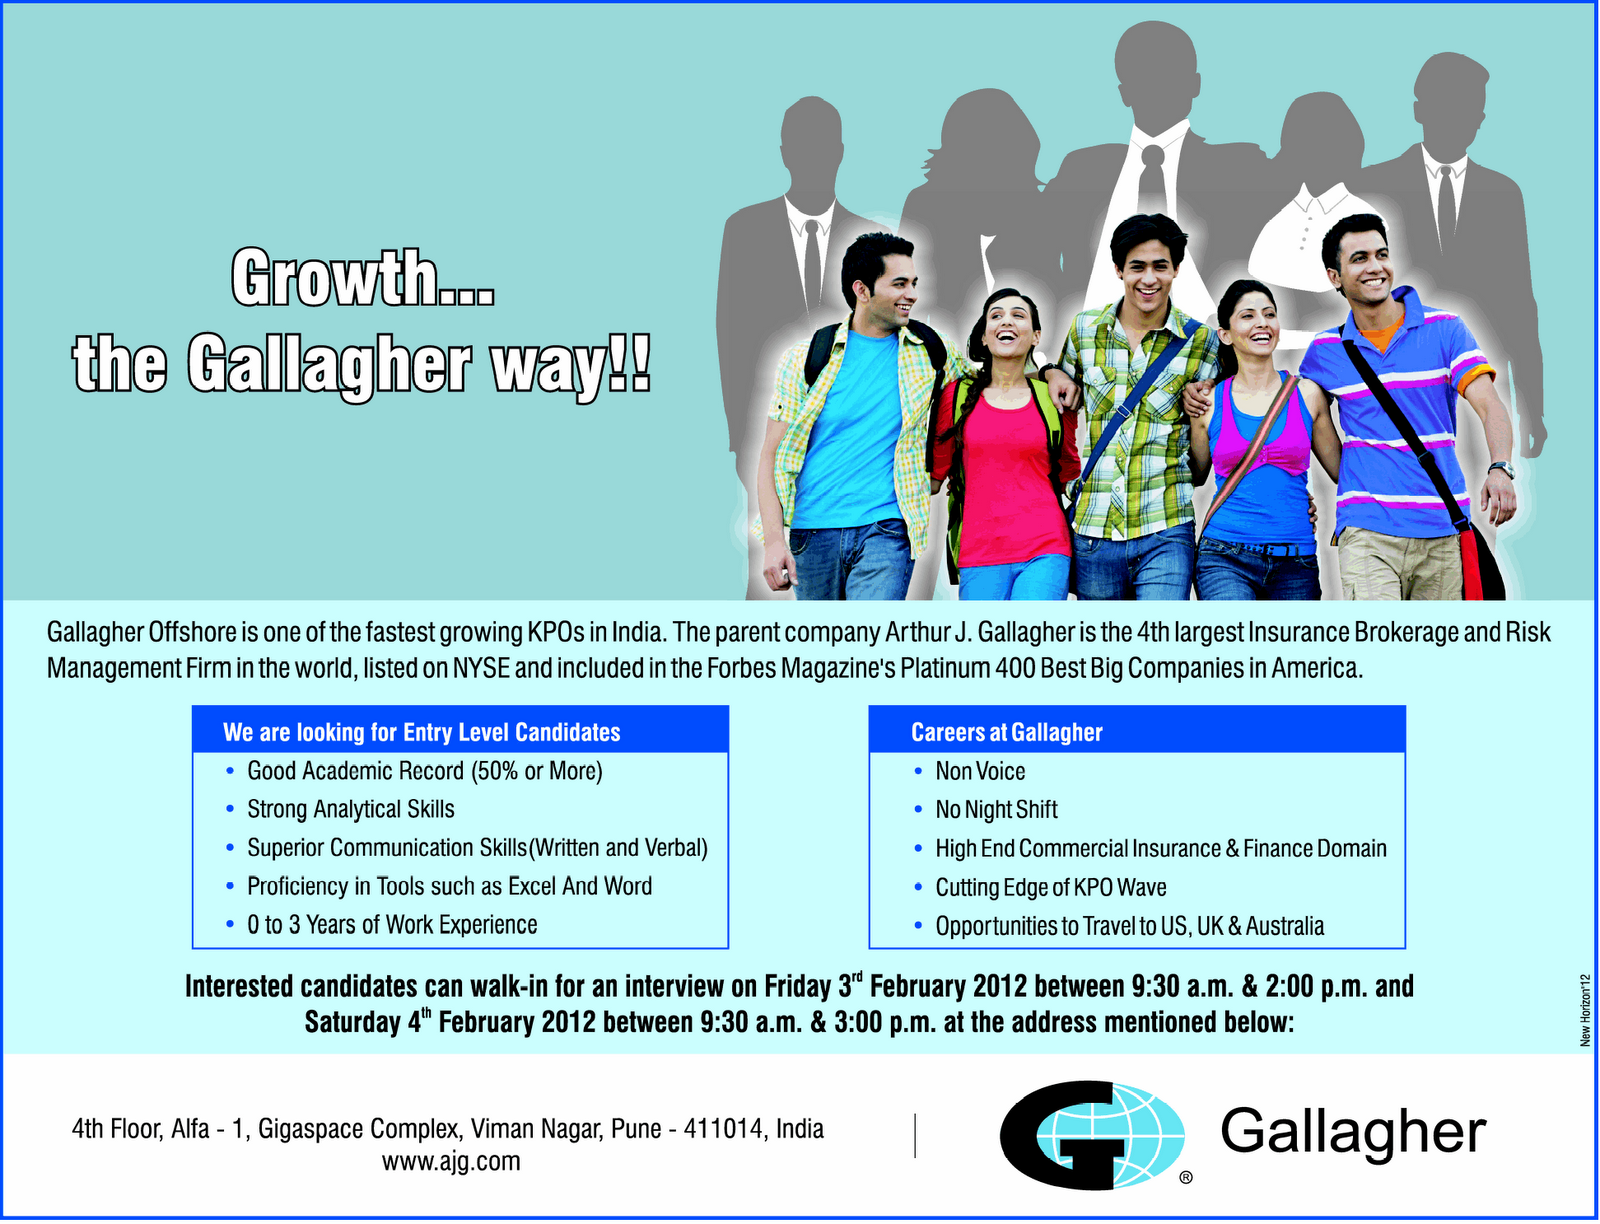 True Gift Walkin Interview In Gallagher At Pune On 4th February 2012